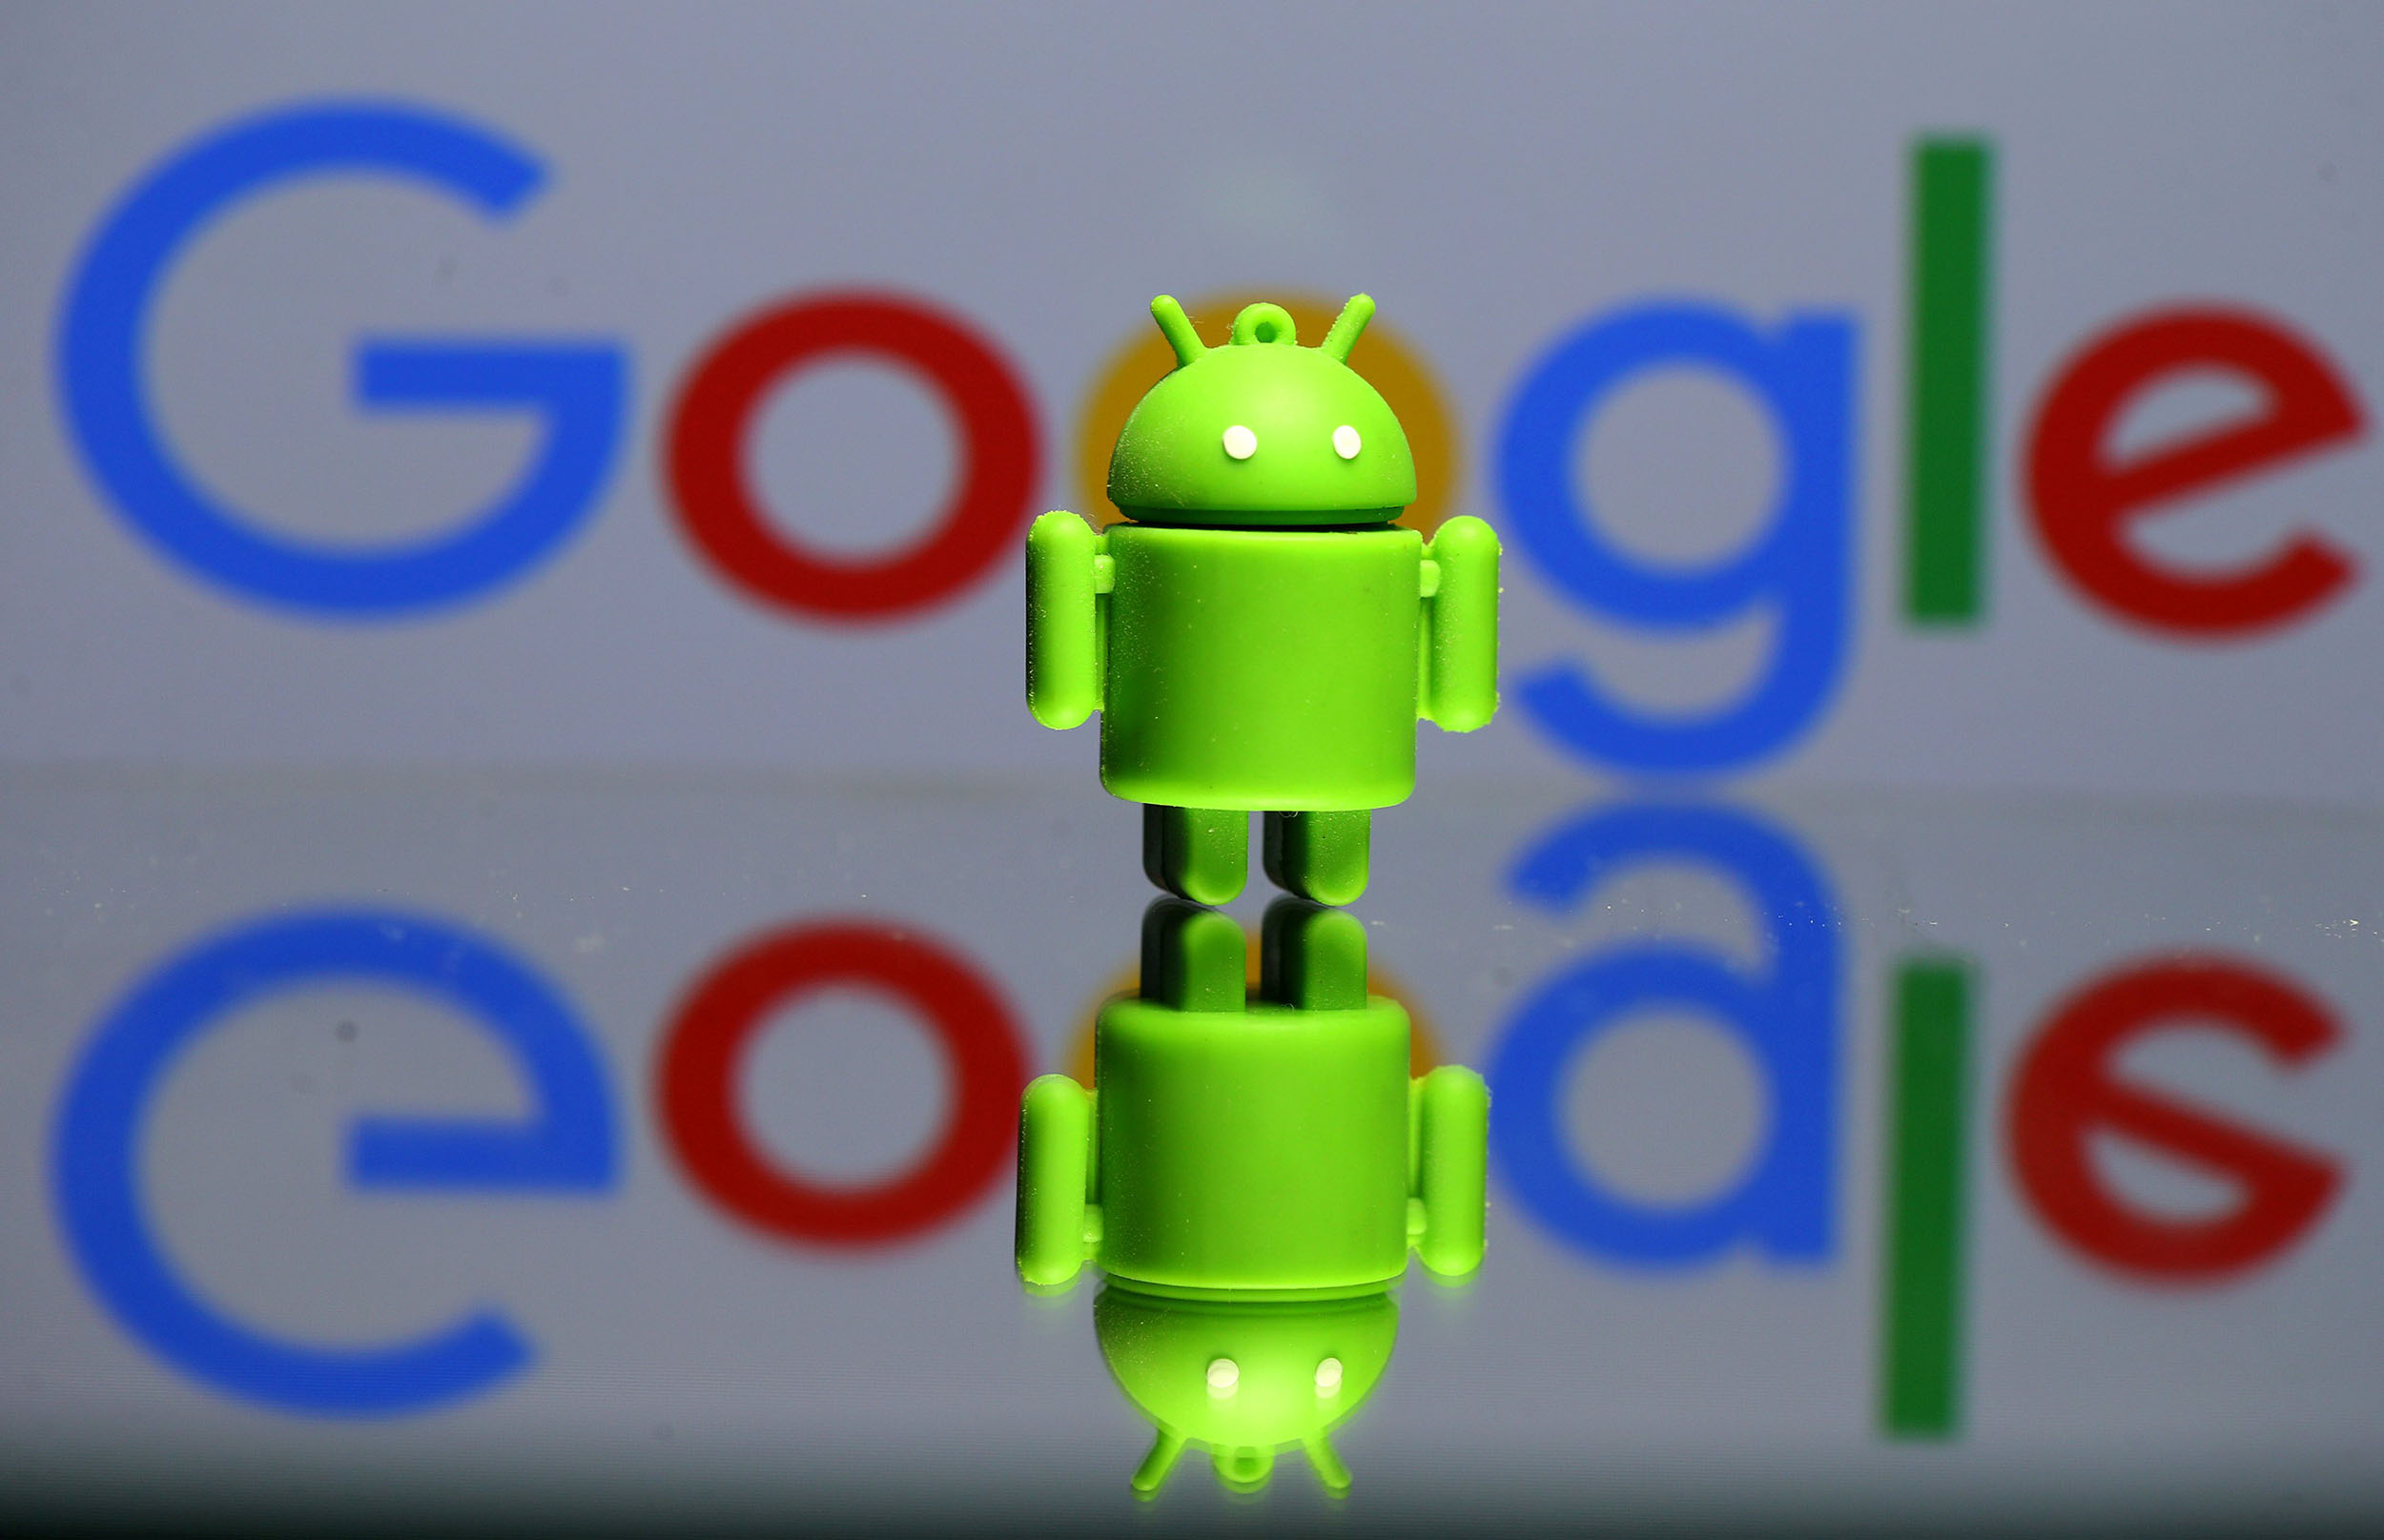 FILE PHOTO - A 3D printed Android mascot Bugdroid is seen in front of a Google logo in this illustration taken July 9, 2017. Picture taken July 9, 2017. REUTERS/Dado Ruvic/Illustration/r/File Photo